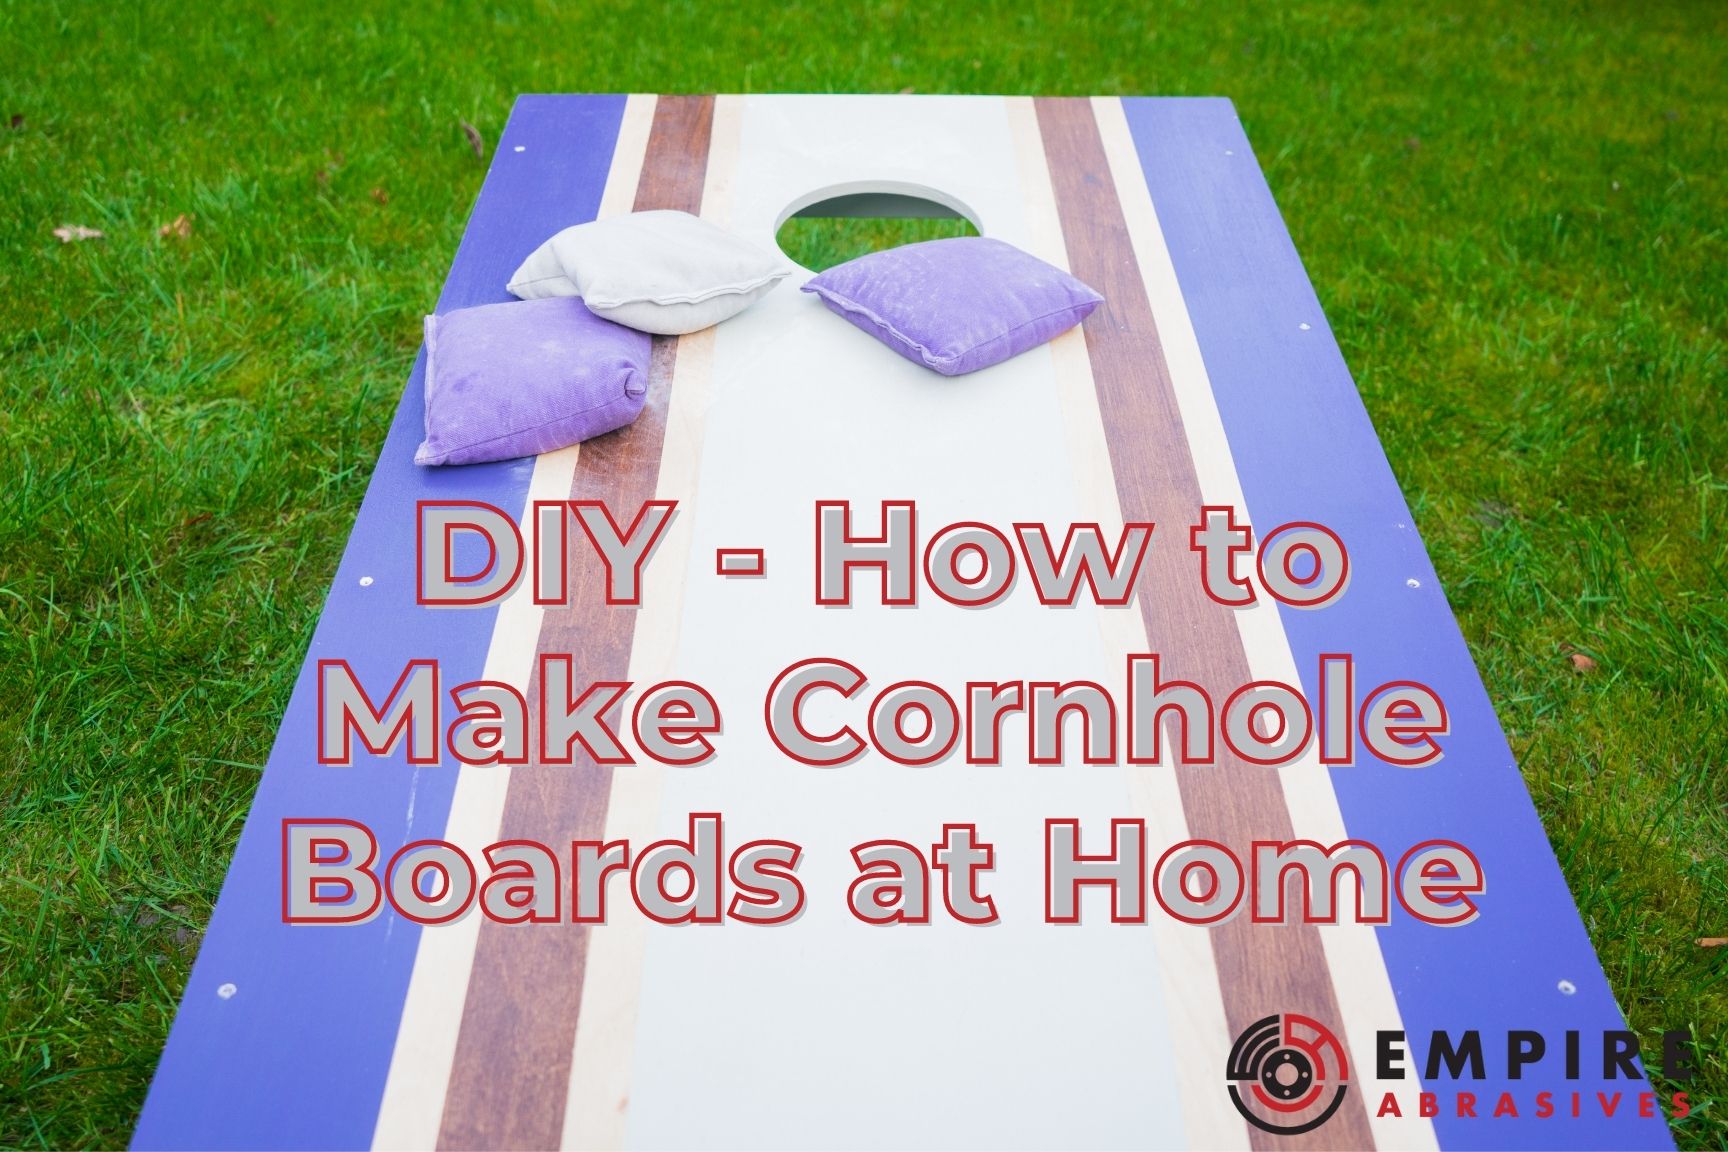 DIY Project - How To Make Cornhole Boards at Home